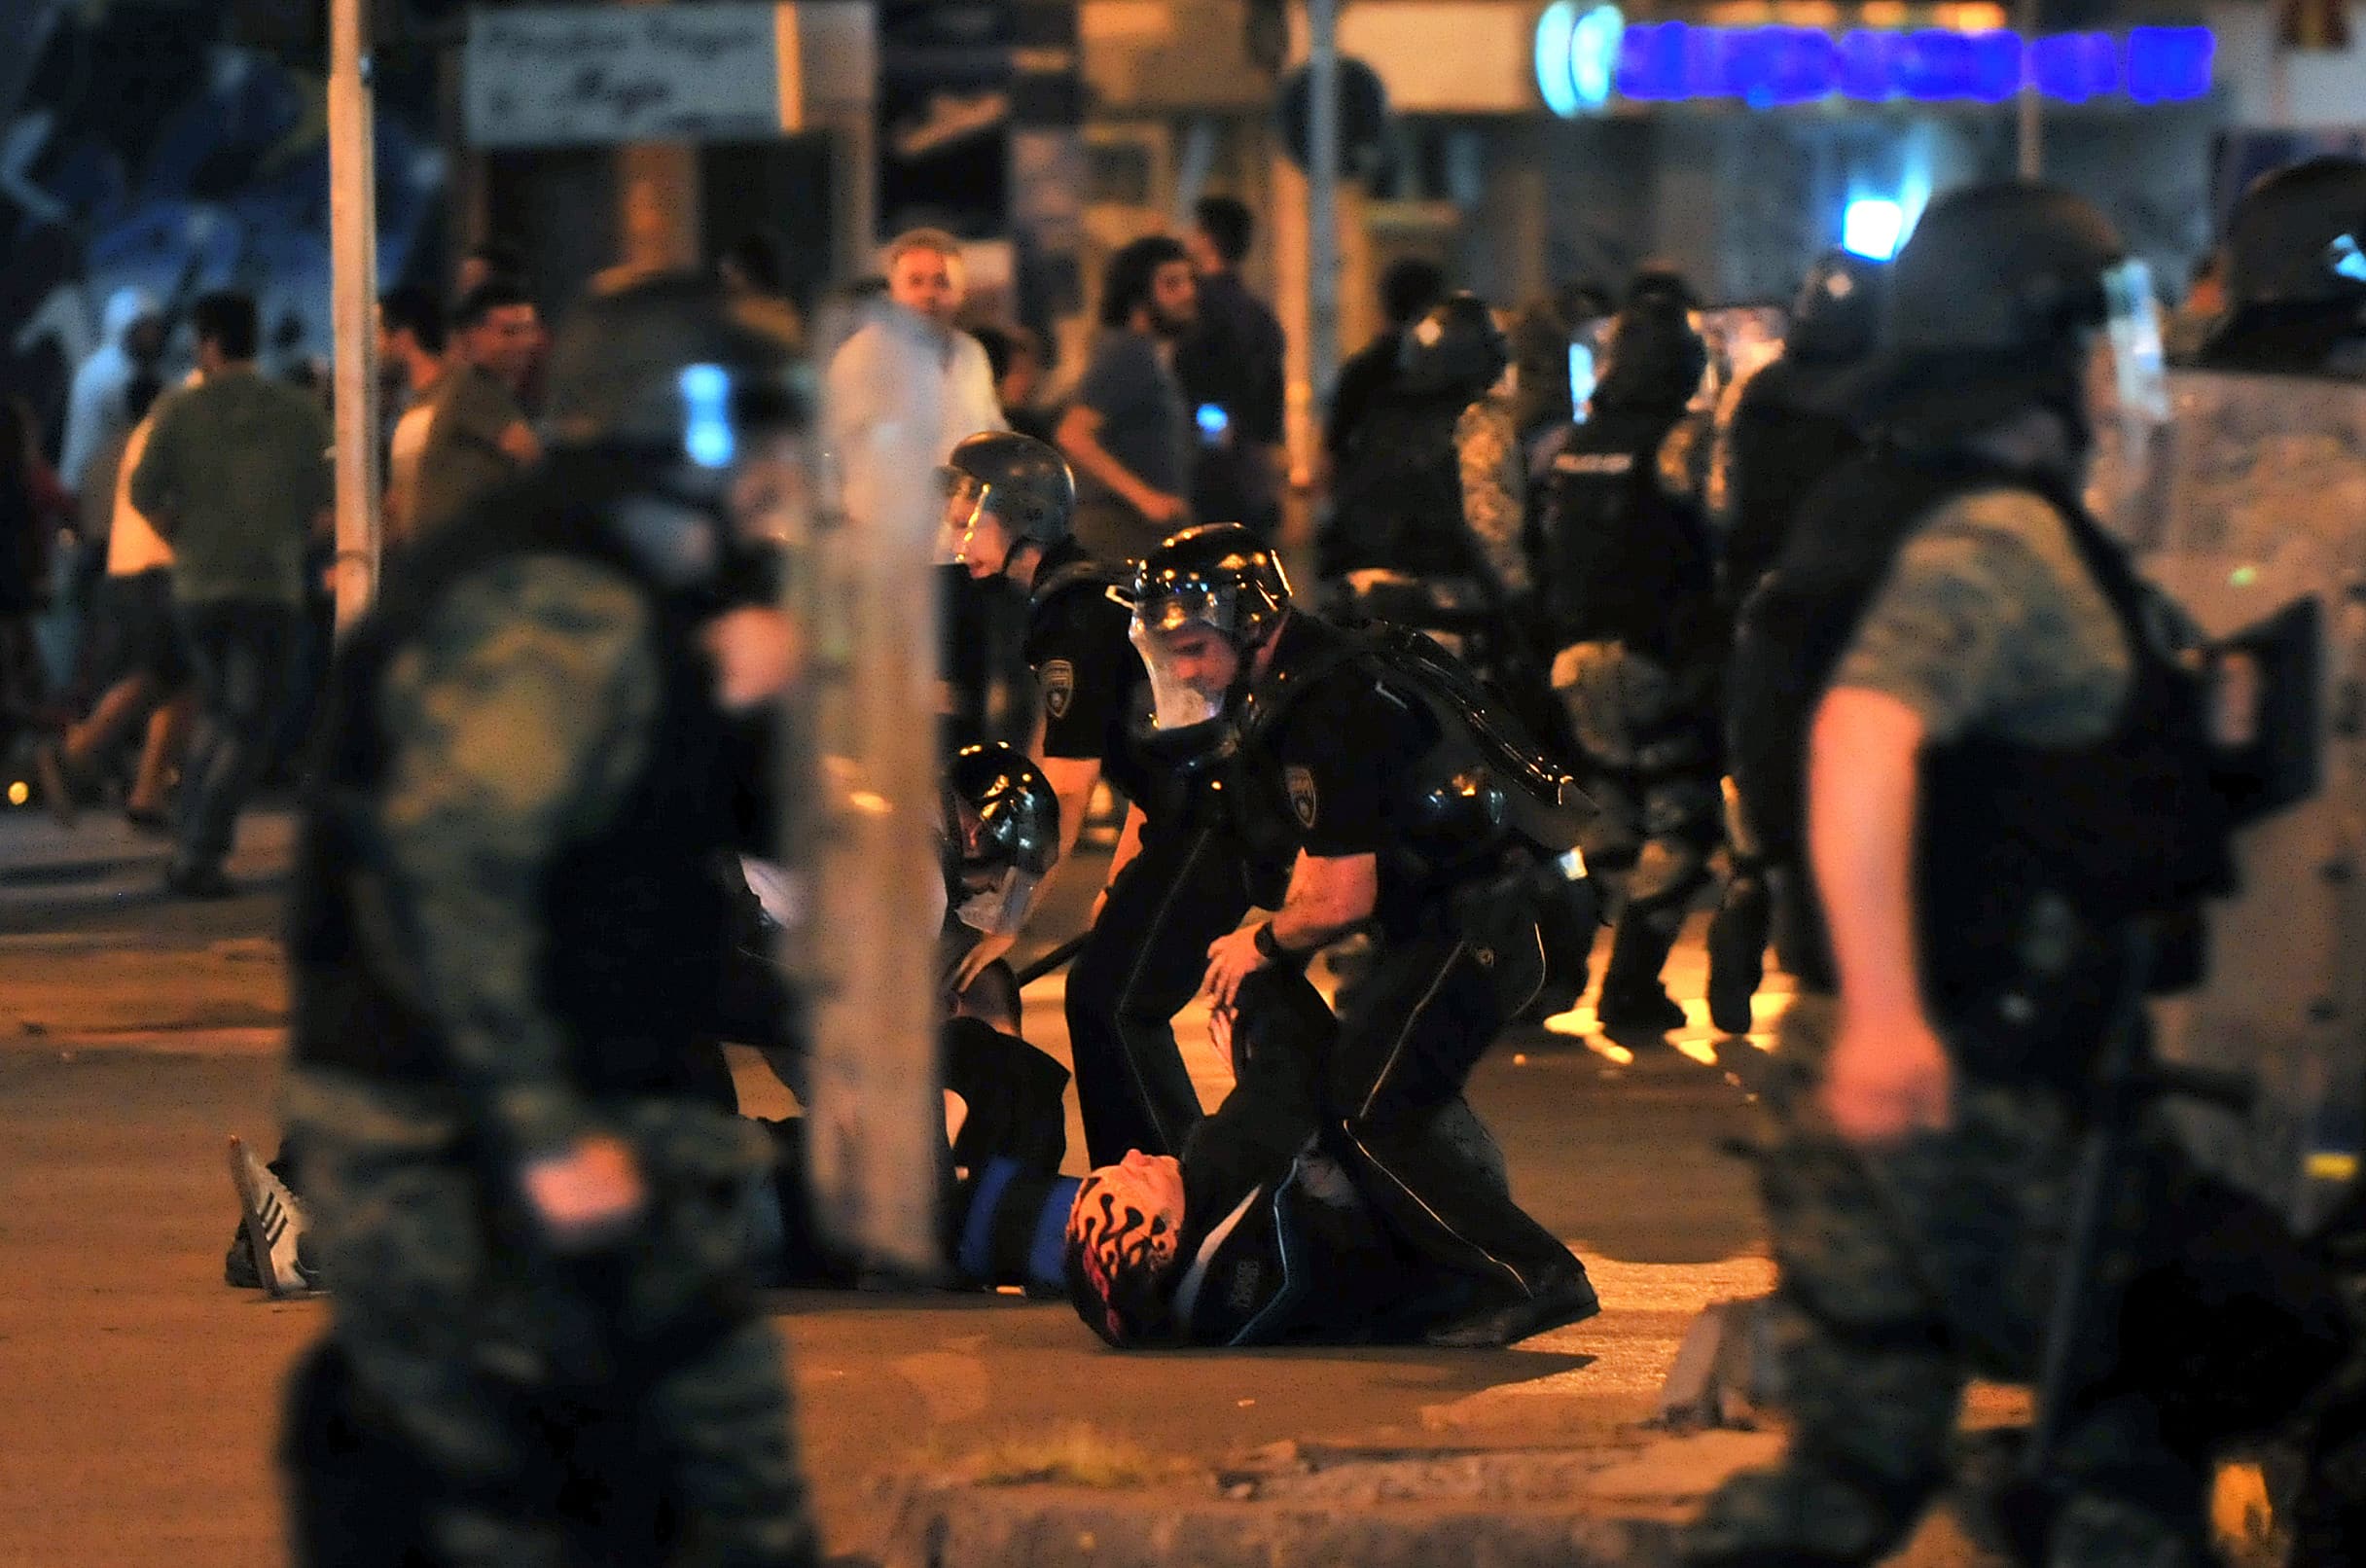 Police arrest protesters after clashes during a protest in Skopje, 5 May 2015, AP Photo/Vangel Tanurovski